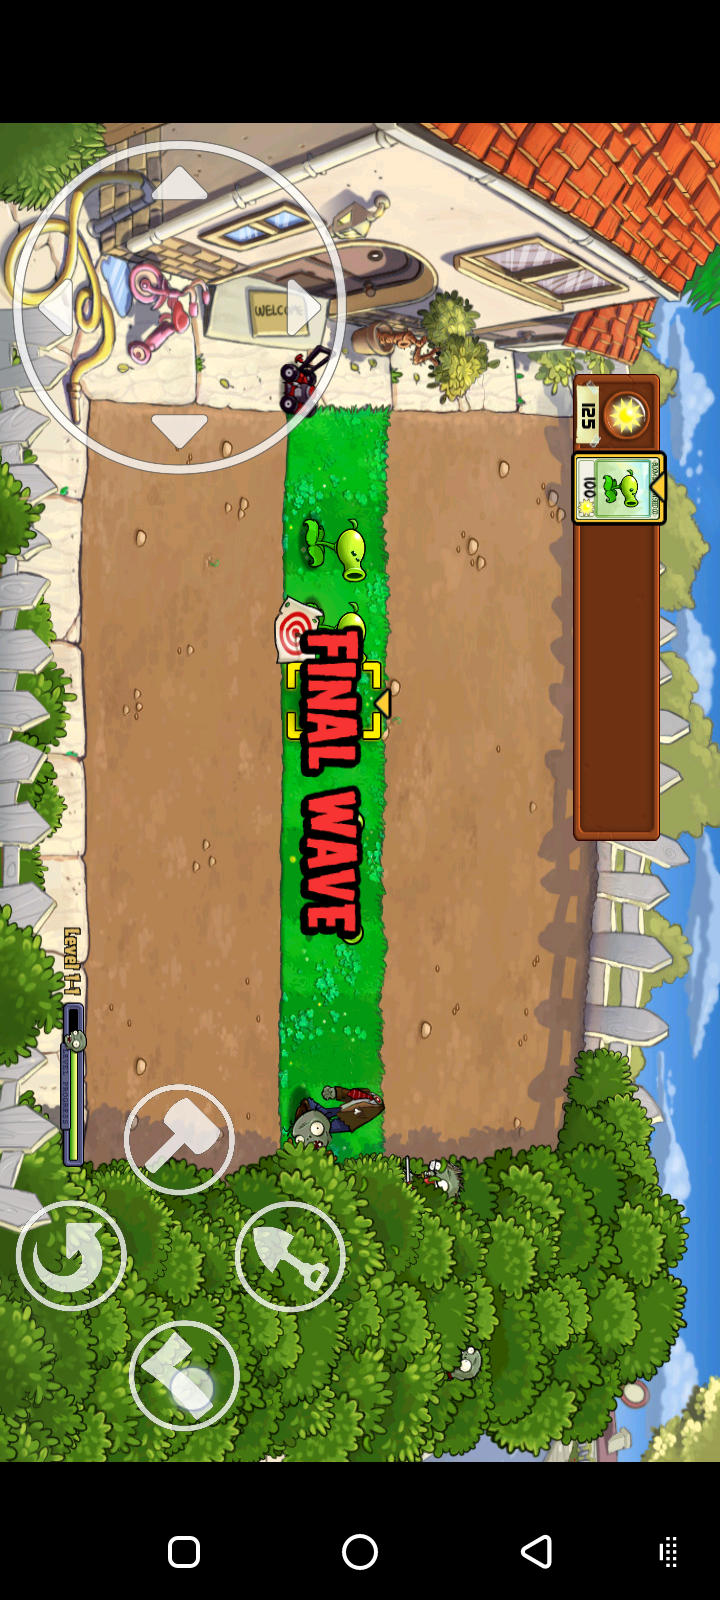 Plants vs Zombies v3.4.4 APK Download For Android